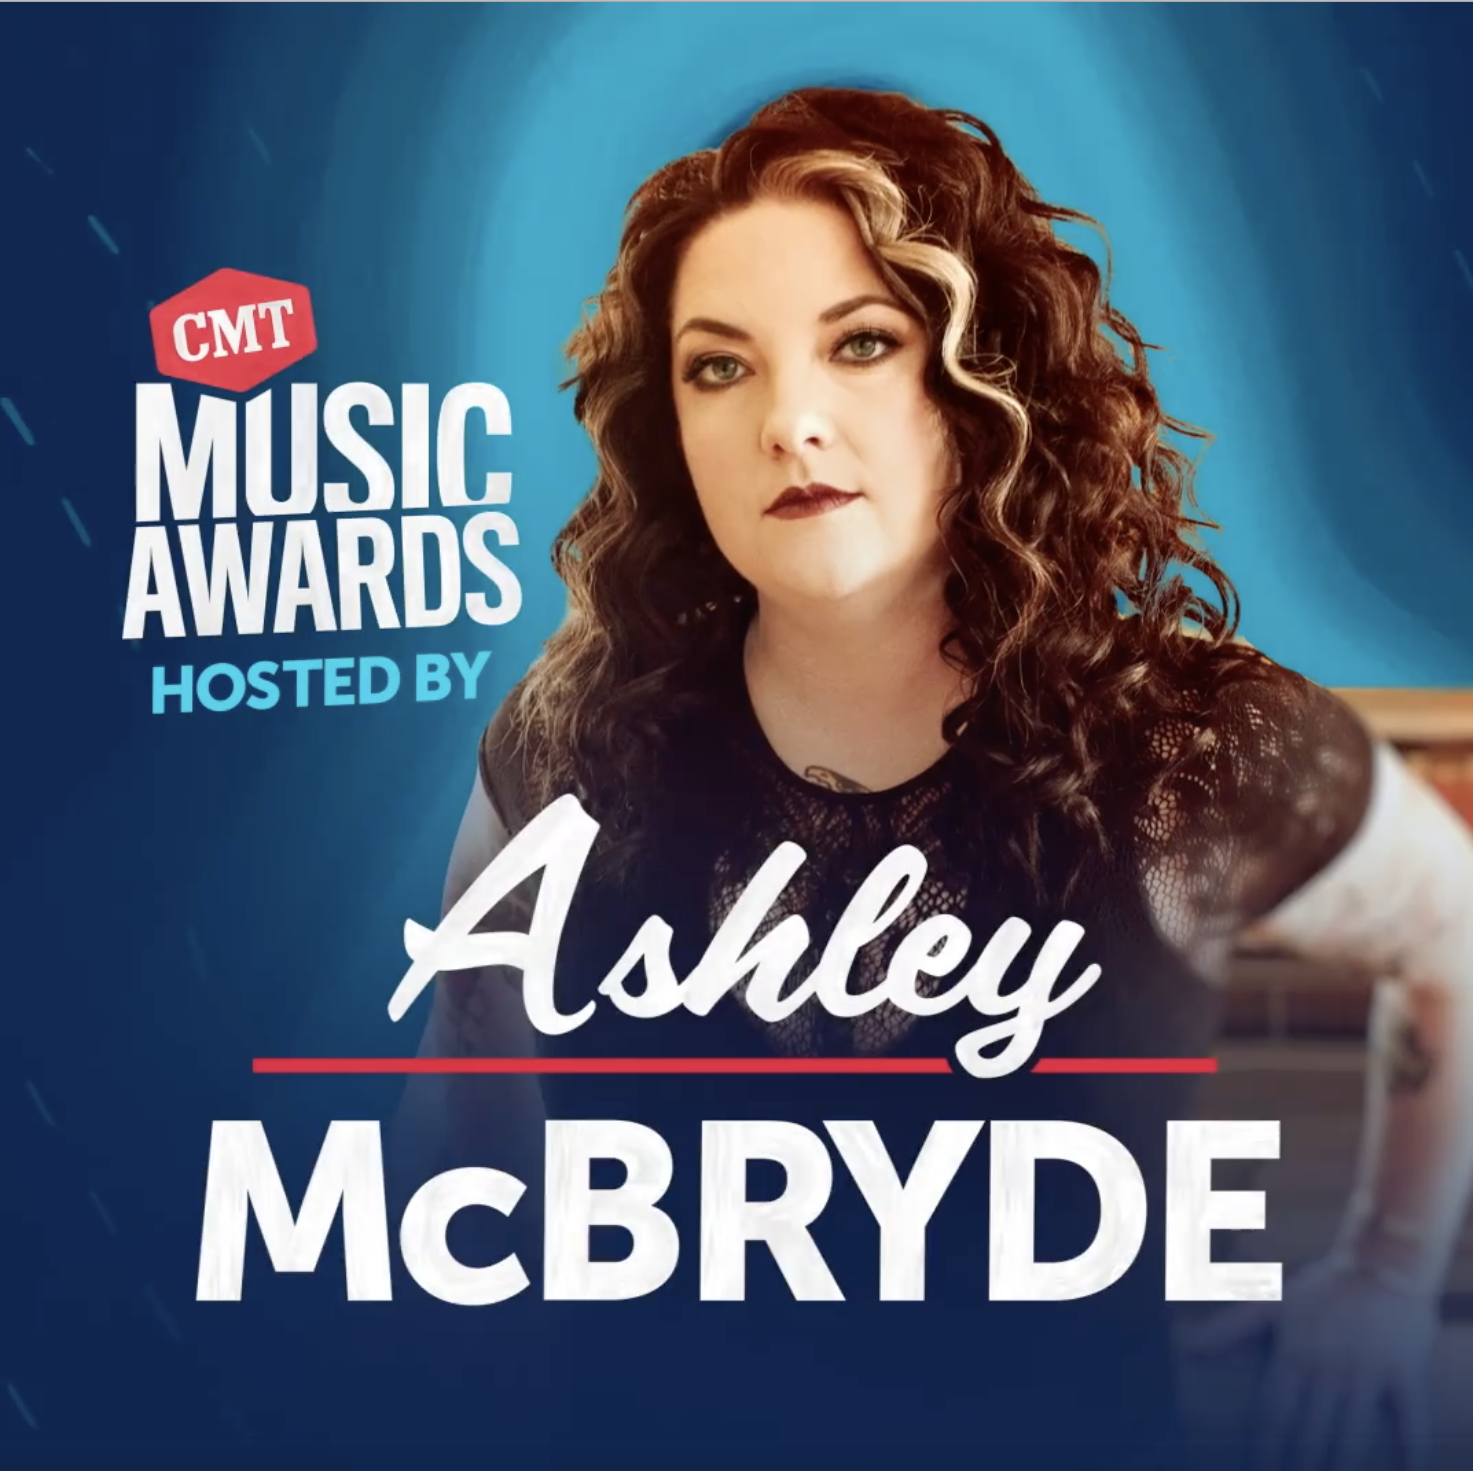 ASHLEY MCBRYDE ANNOUNCED AS FINAL HOST OF THE "2020 CMT MUSIC AWARDS"